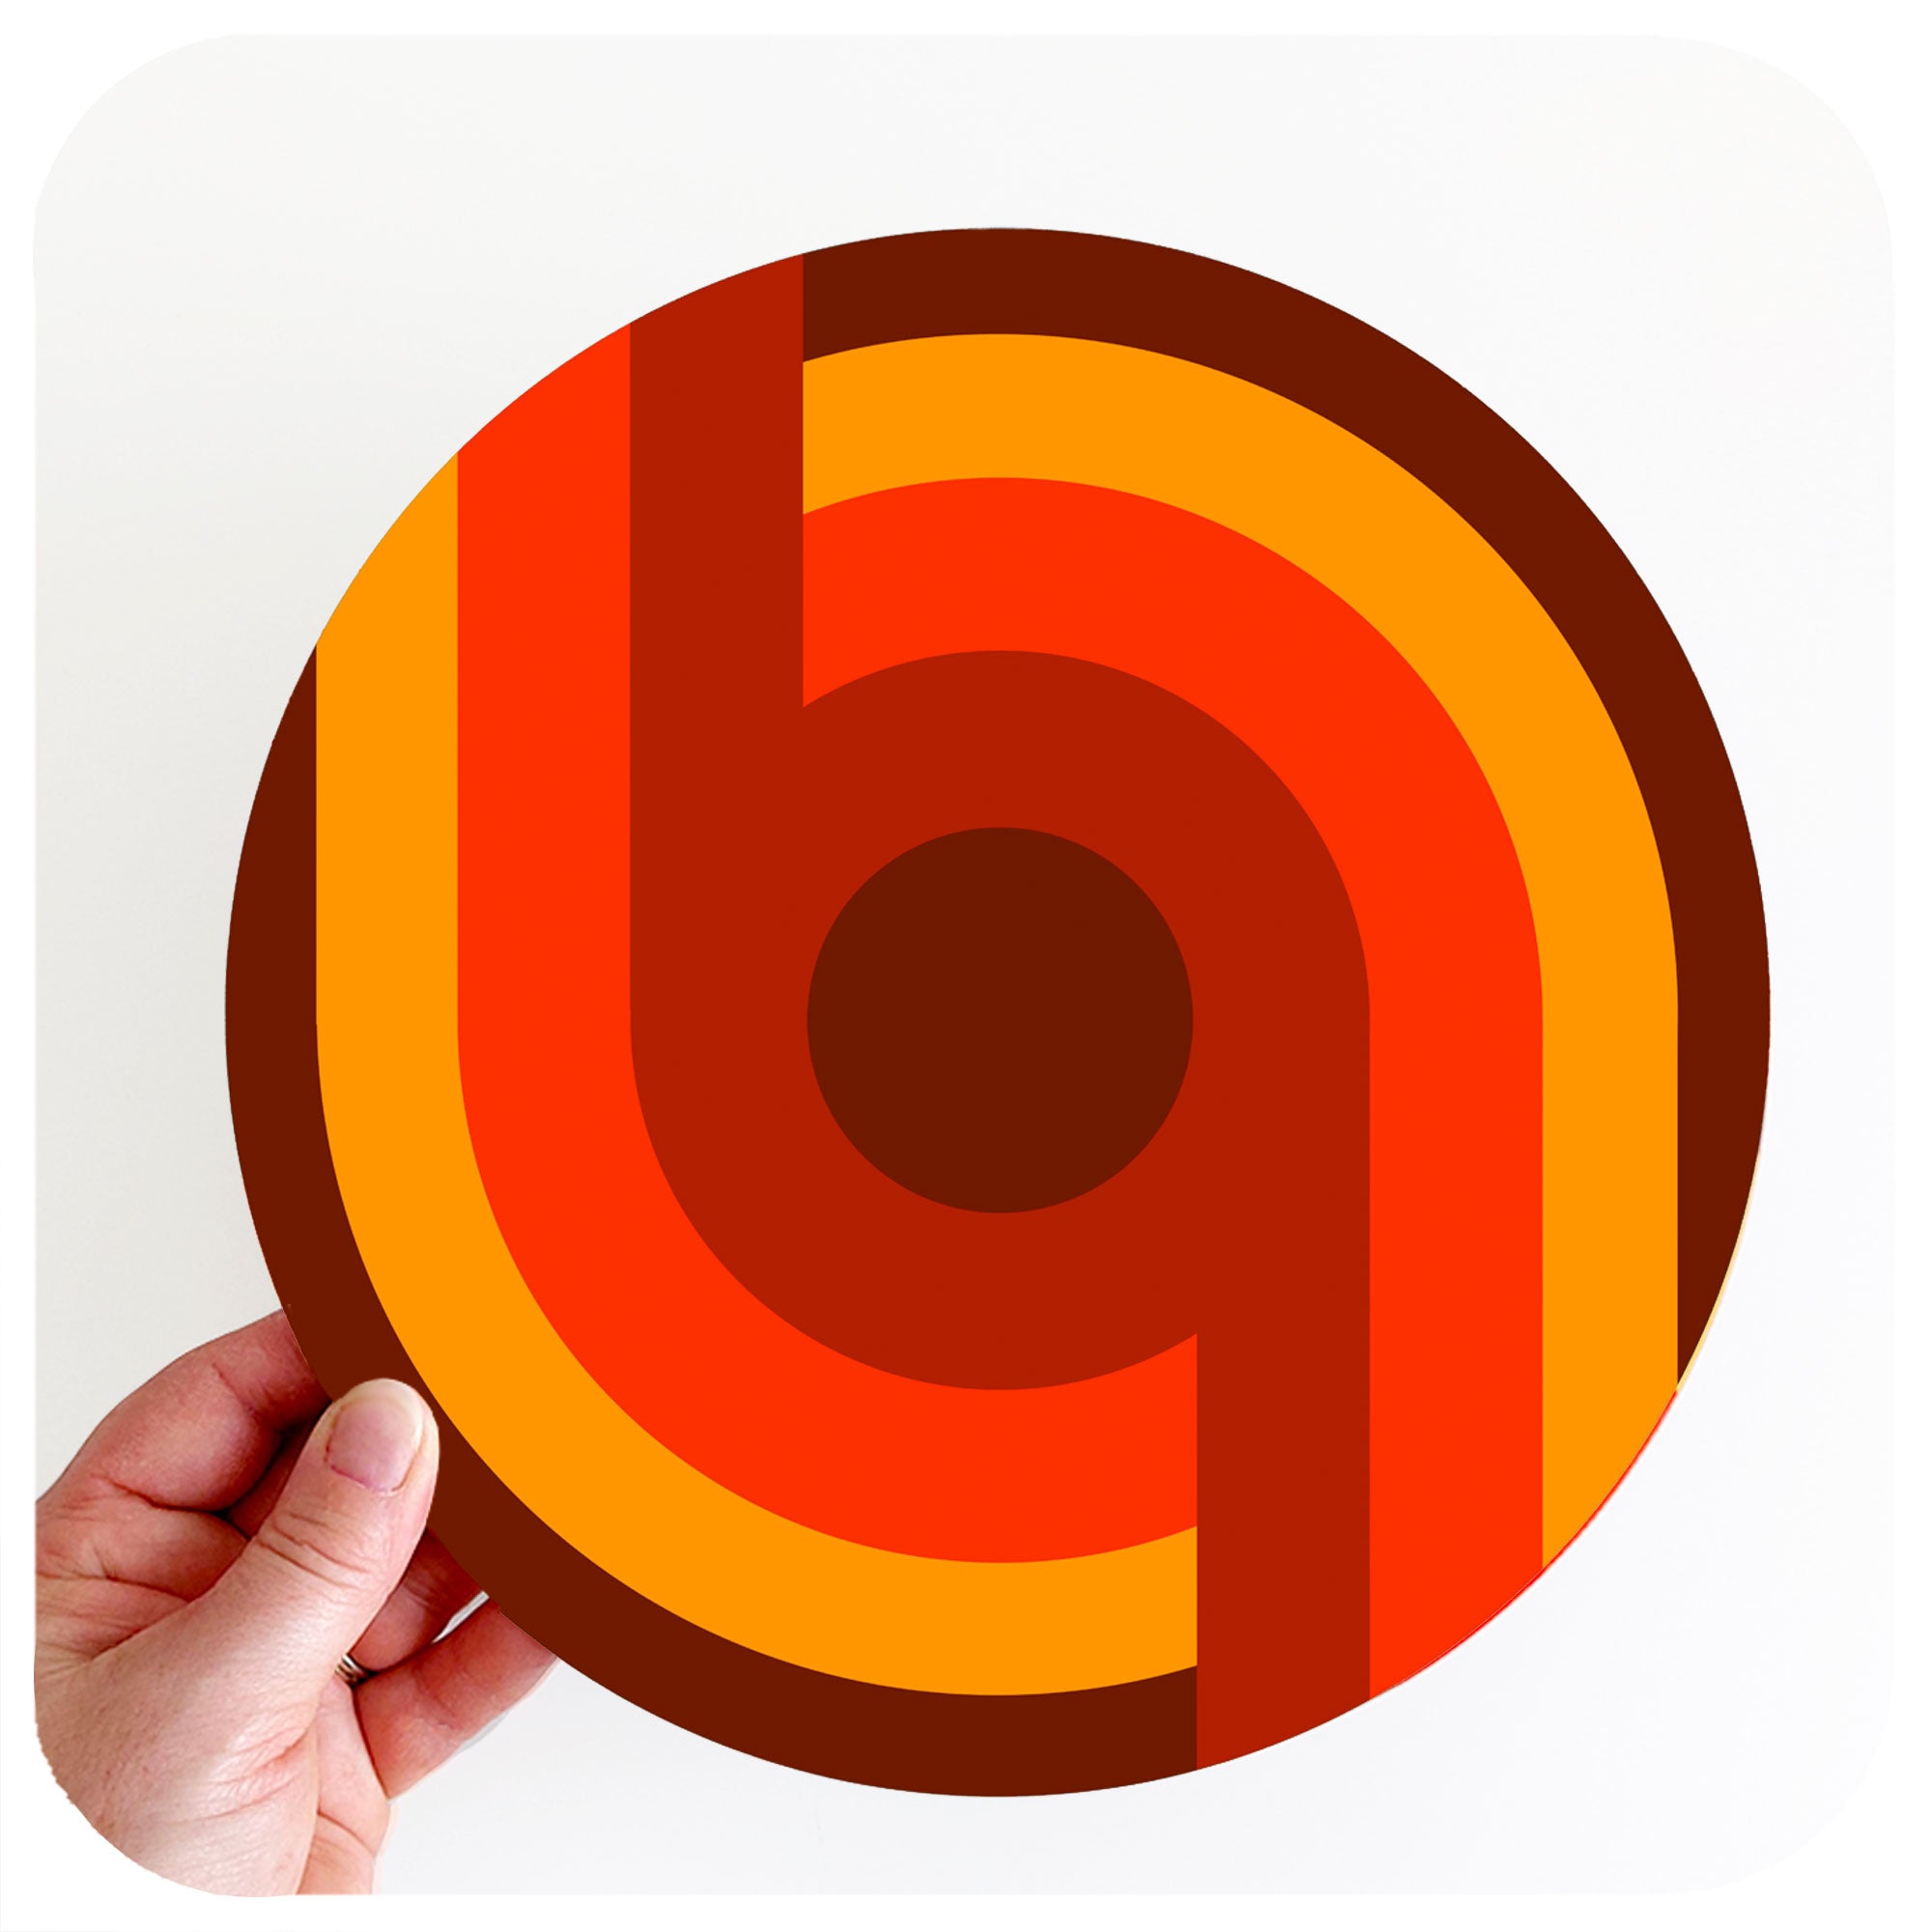 A hand holds up a 70s style round placemat against a white background. The design on the placemat is a supergraphic in oranges and browns | The Inkabilly Emporium